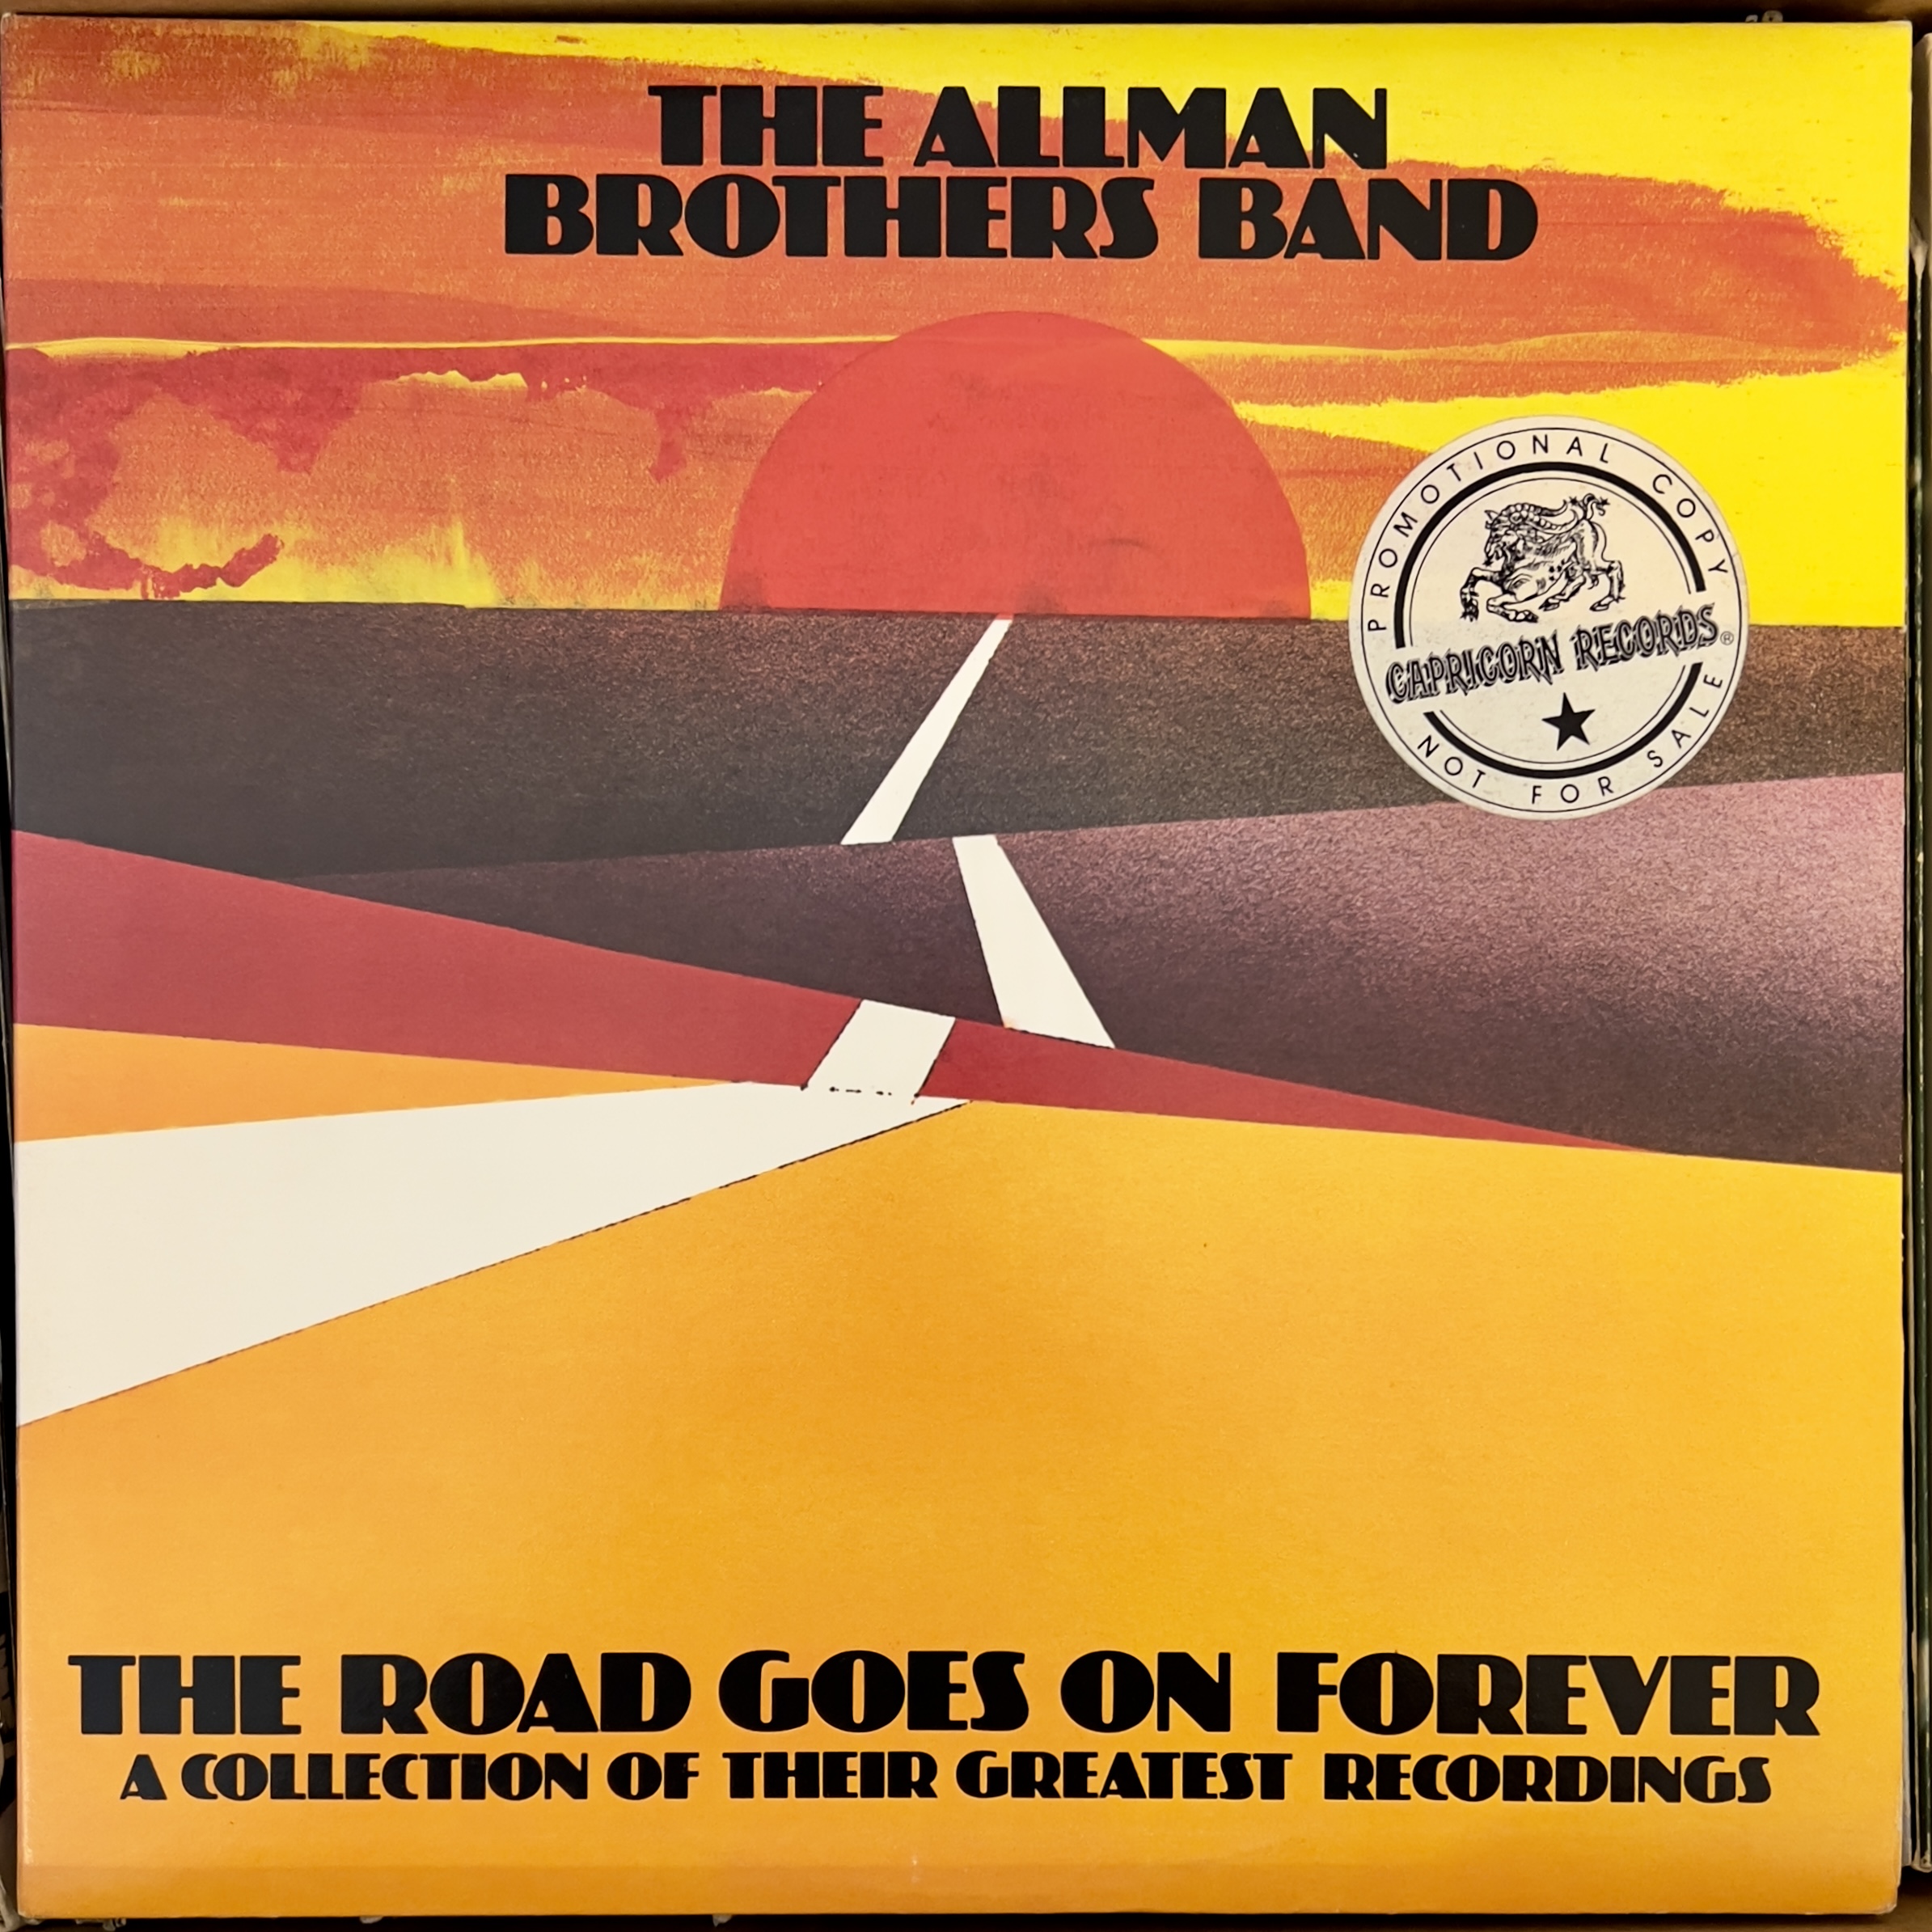 The Road Goes On Forever: A Collection of Their Greatest Recordings by The Allman Brothers Band